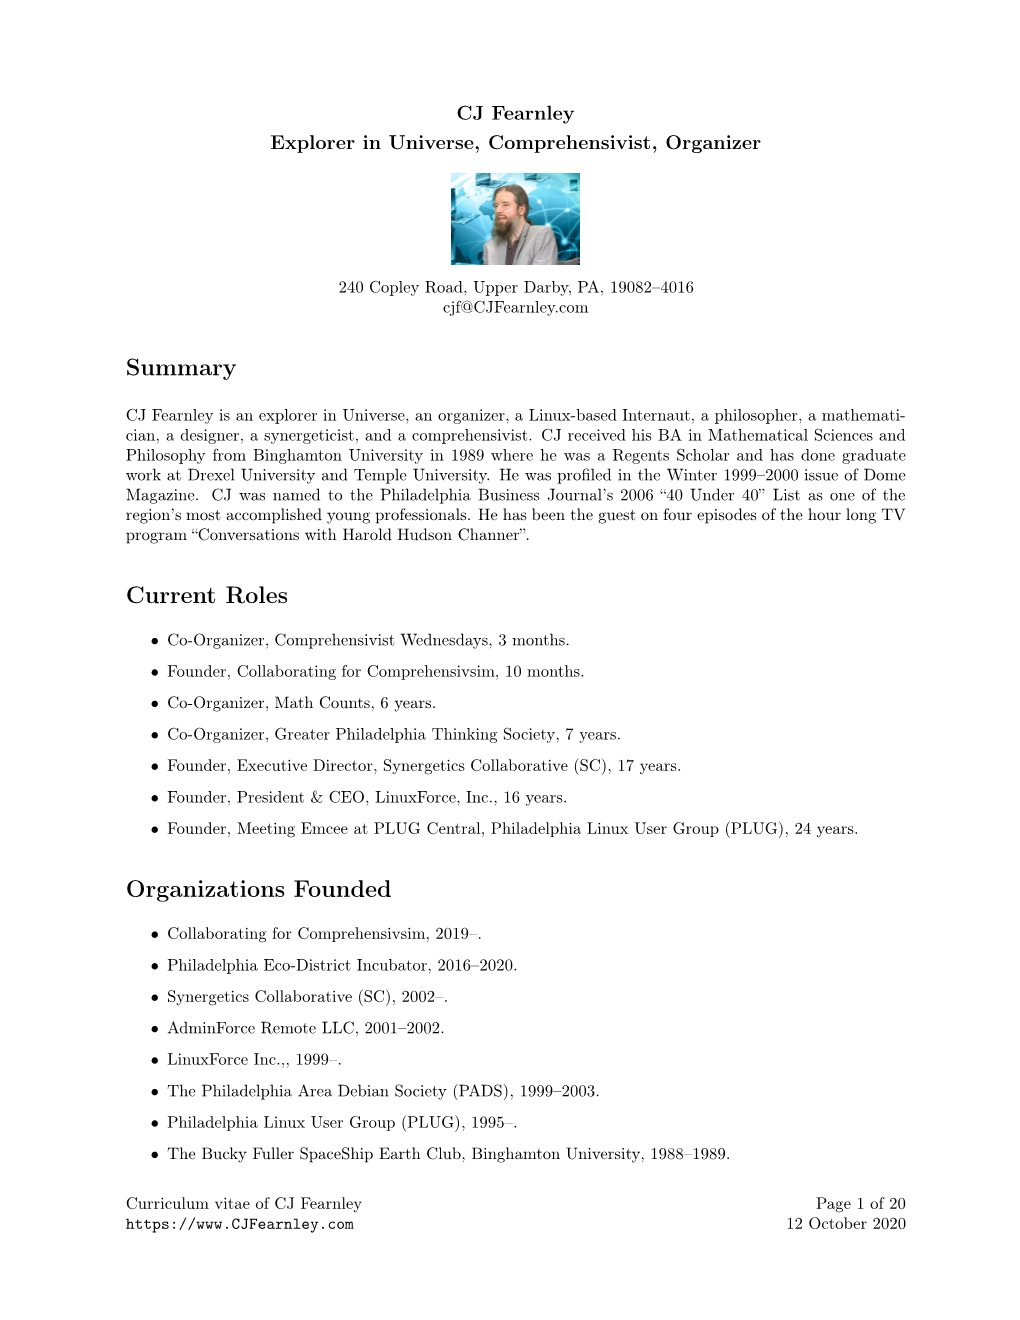 Curriculum Vitae of CJ Fearnley Page 1 of 20 12 October 2020 Web Presences